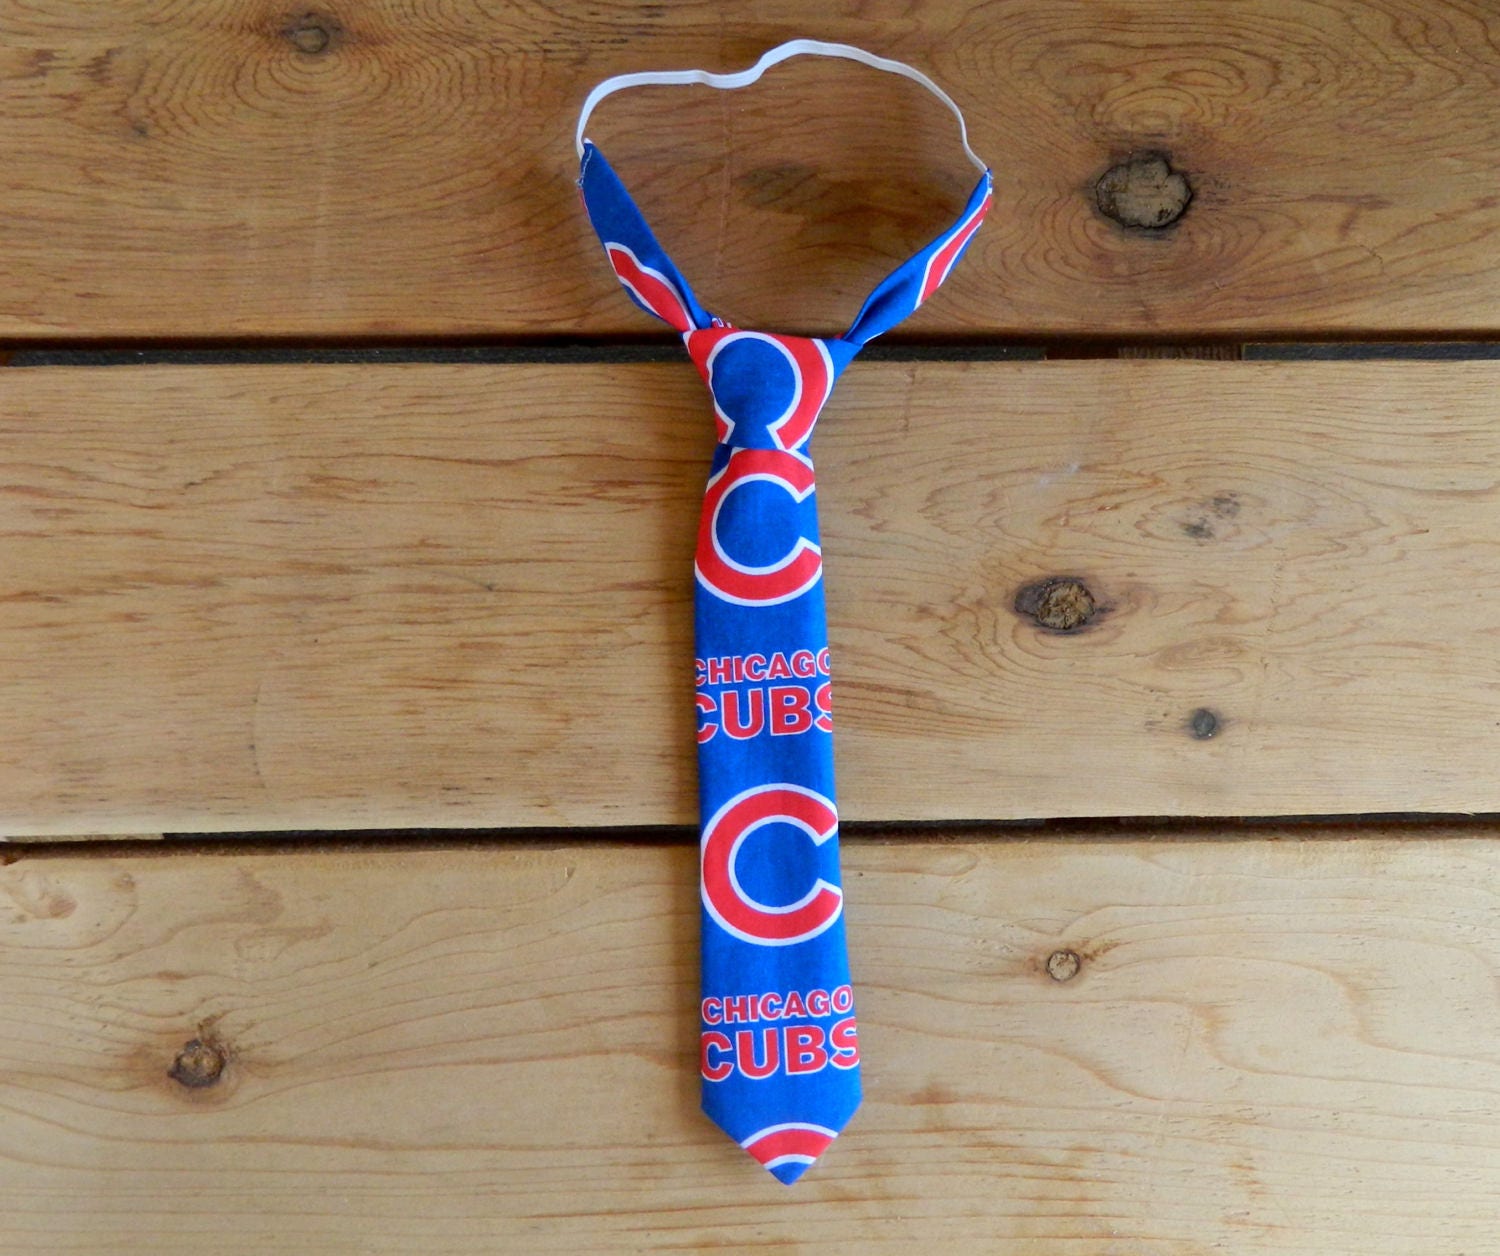 Chicago Cubs Themed Adjustable Infant/Toddler/Boys Neck Tie or Bow-Tie: 0-18 Months, 2t-4t, 5T/6T, 7/8